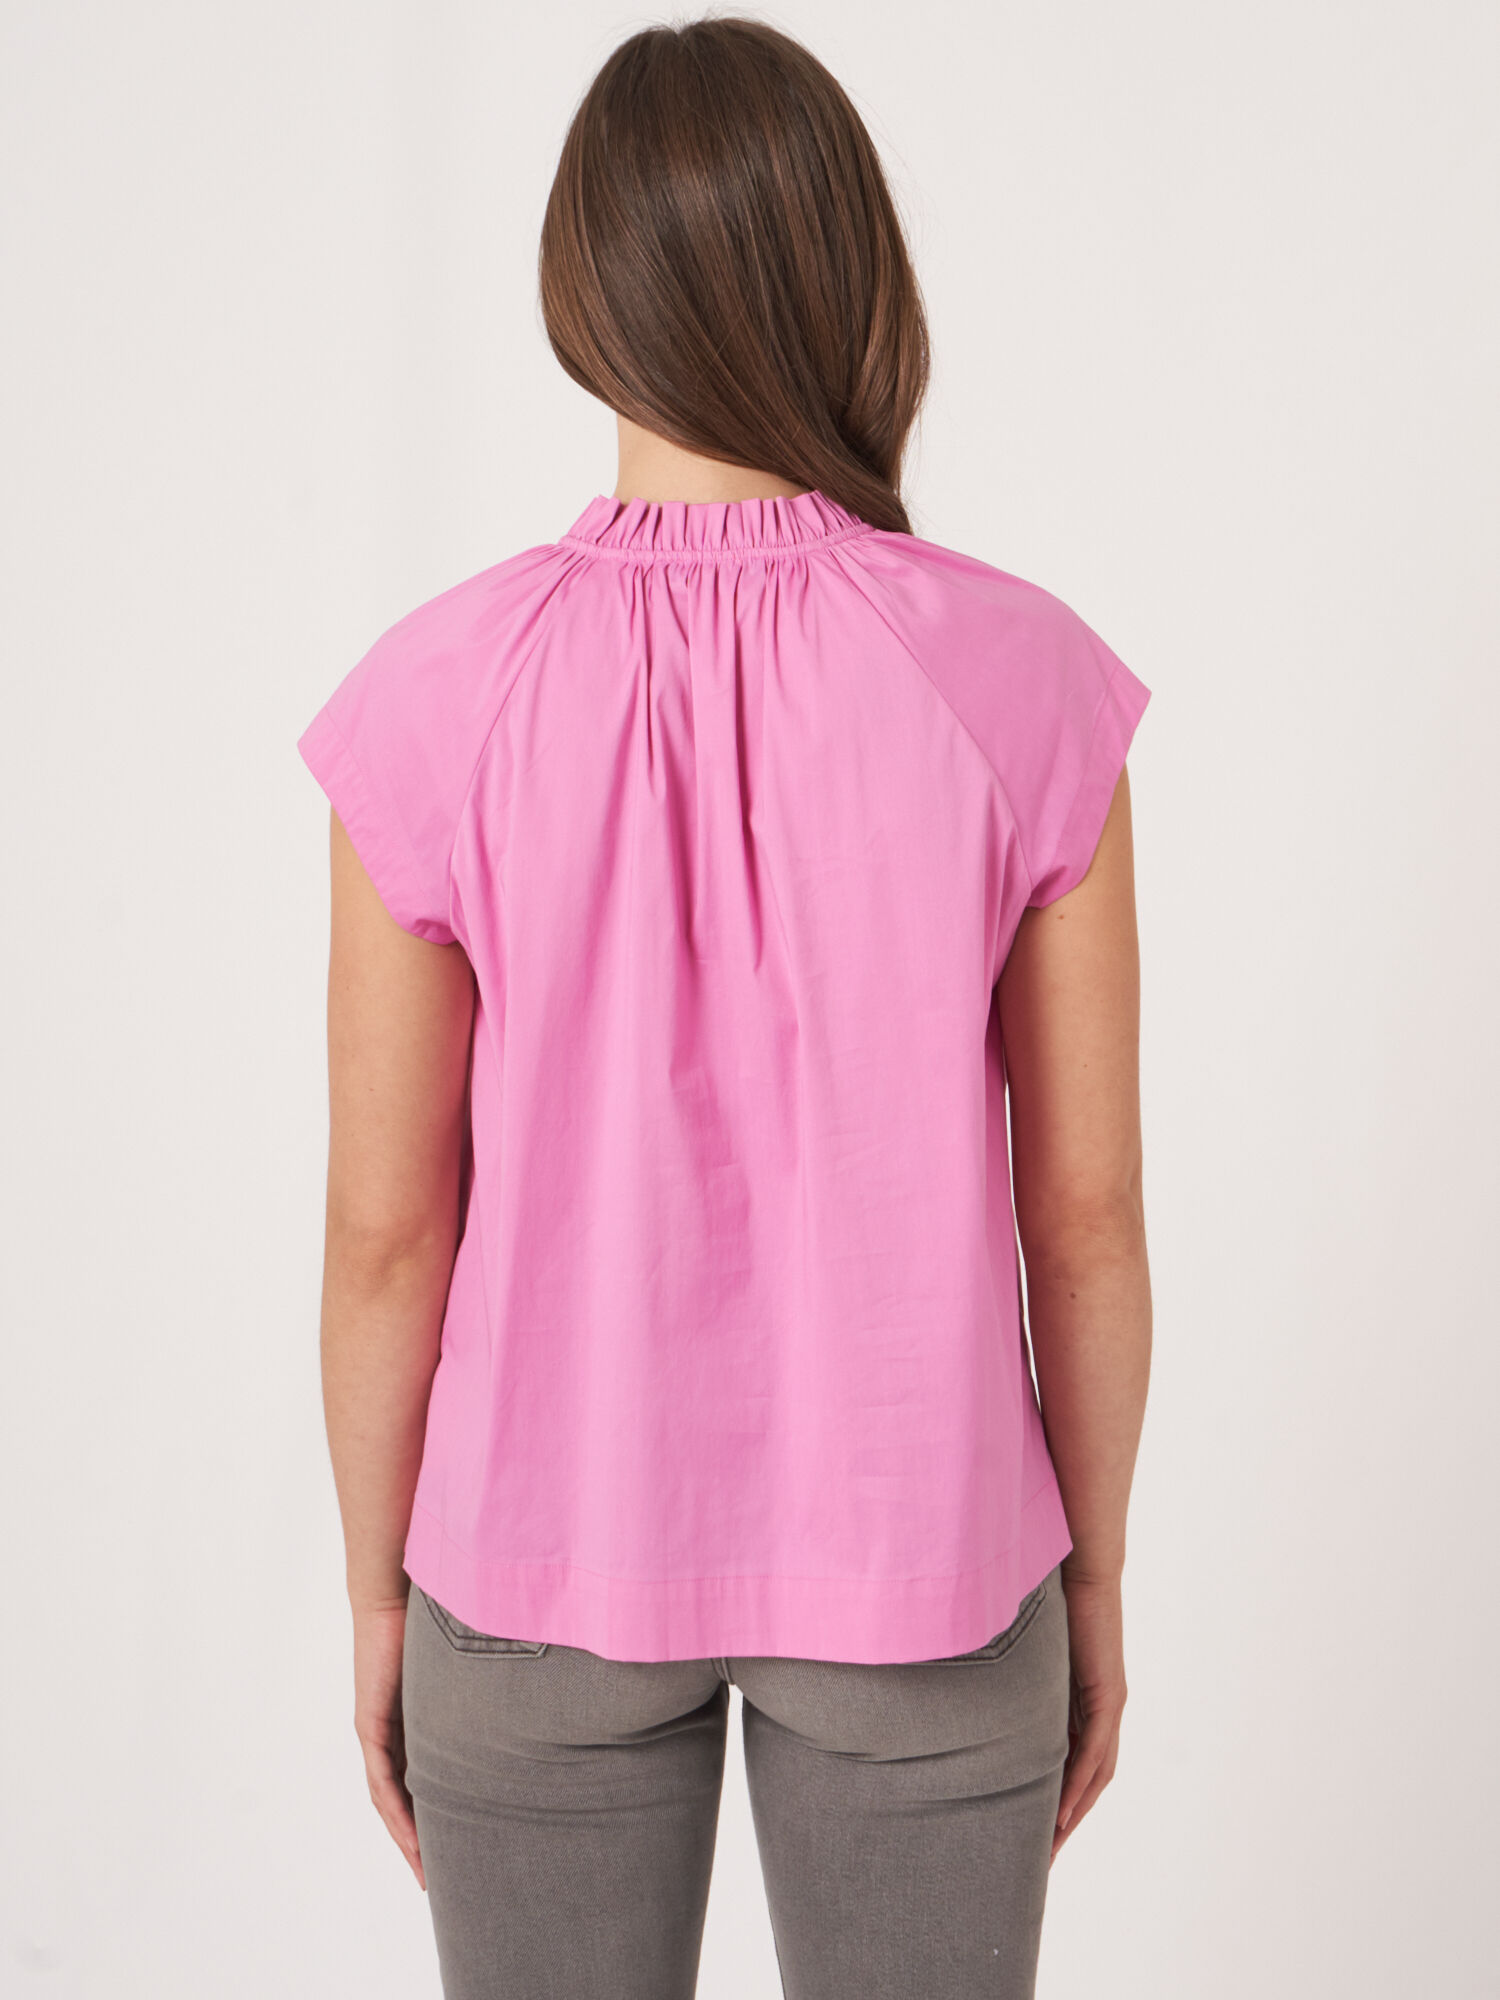 Sleeves blouse with gathered neckline and tie